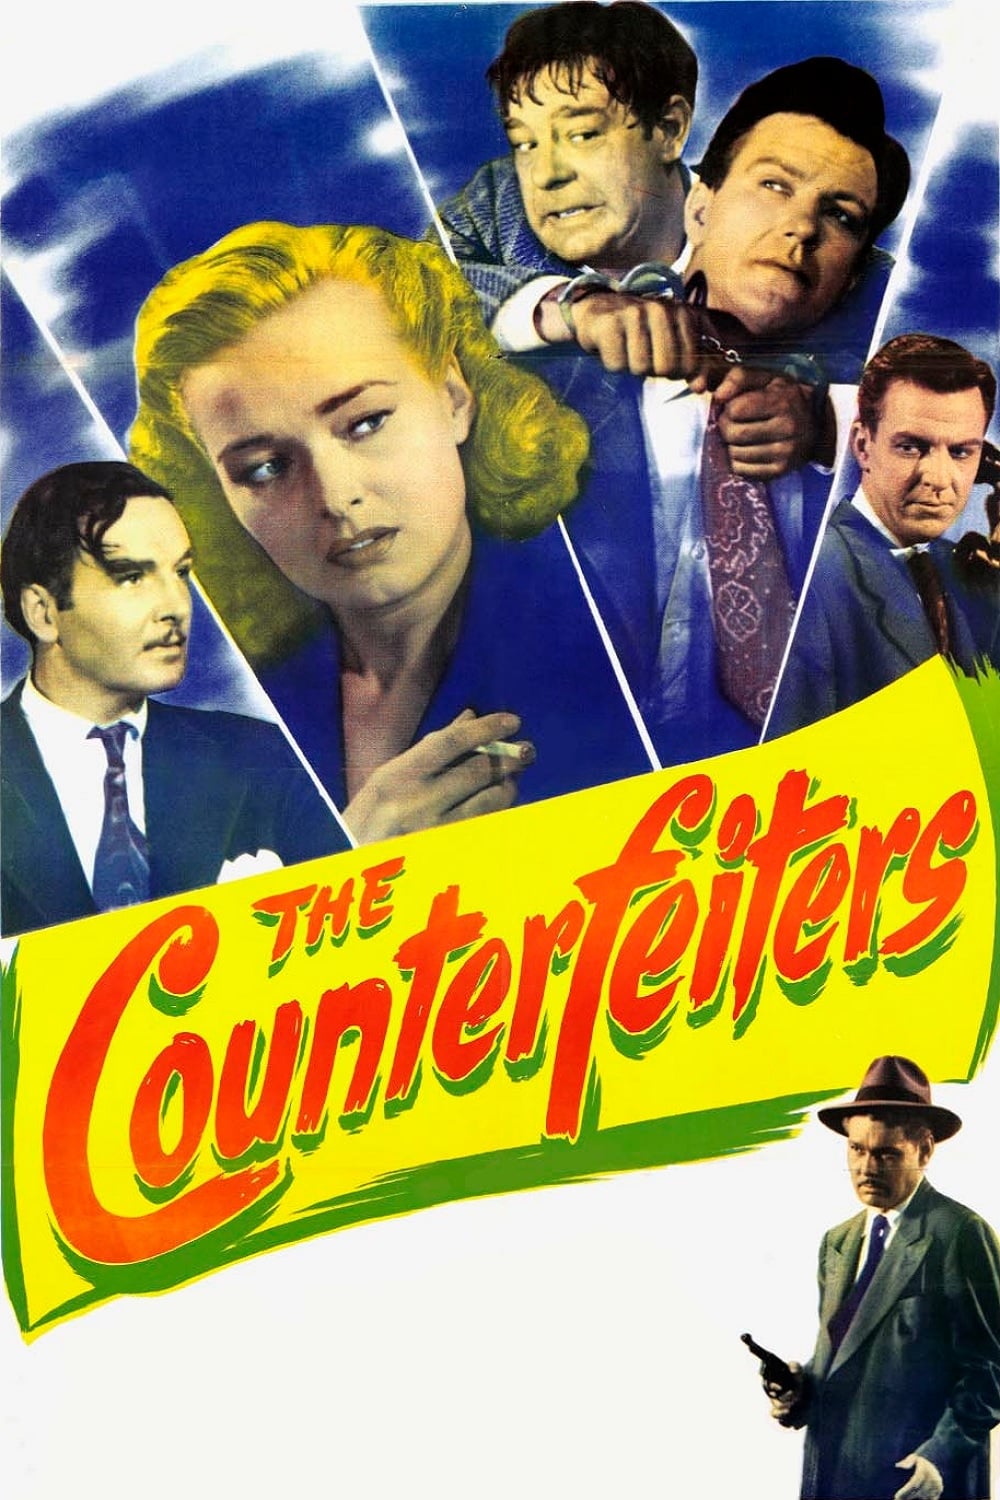 The Counterfeiters (1948)